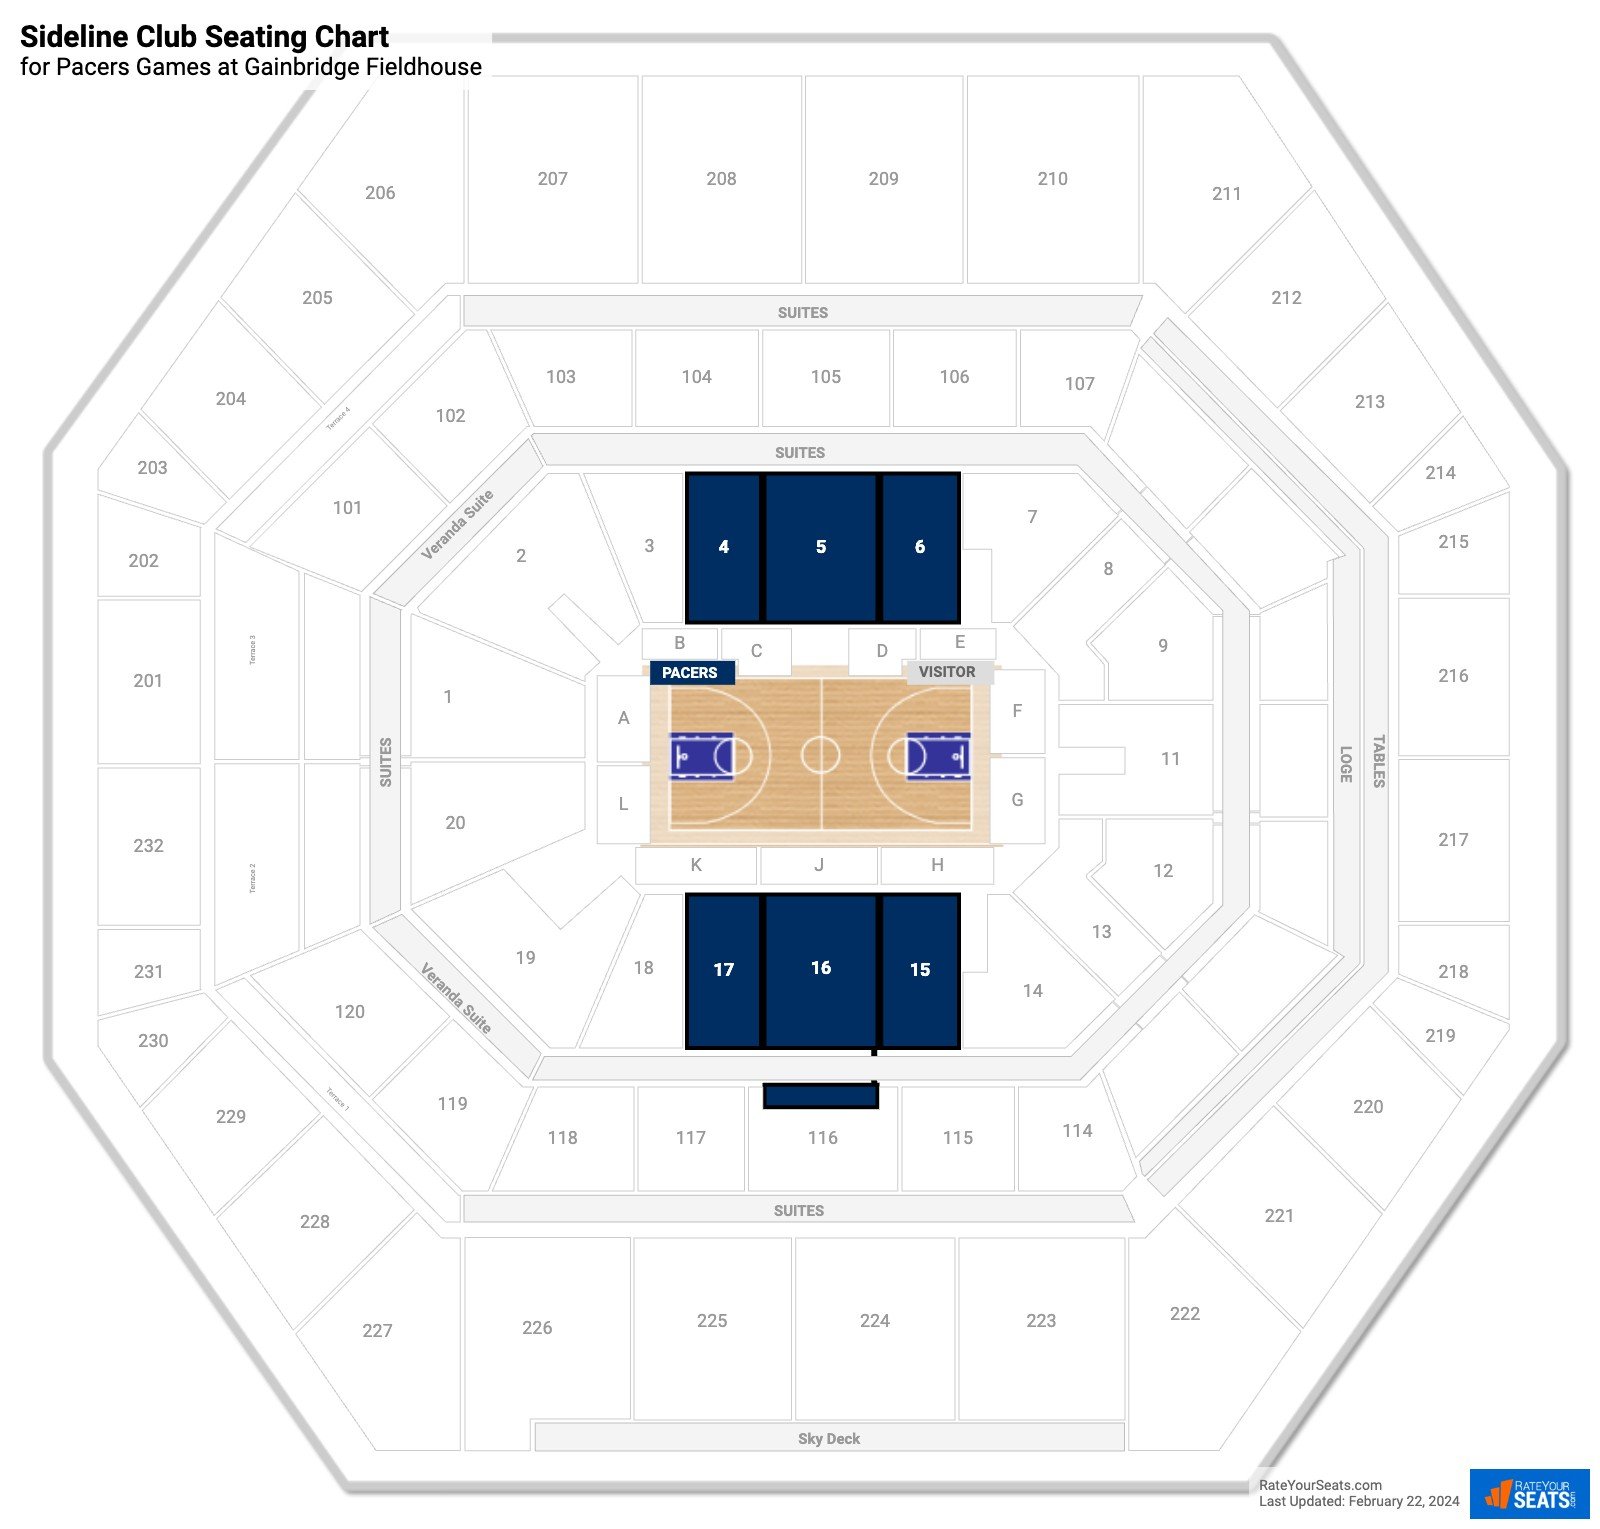 Pacers Sideline Club Seating Chart at Gainbridge Fieldhouse